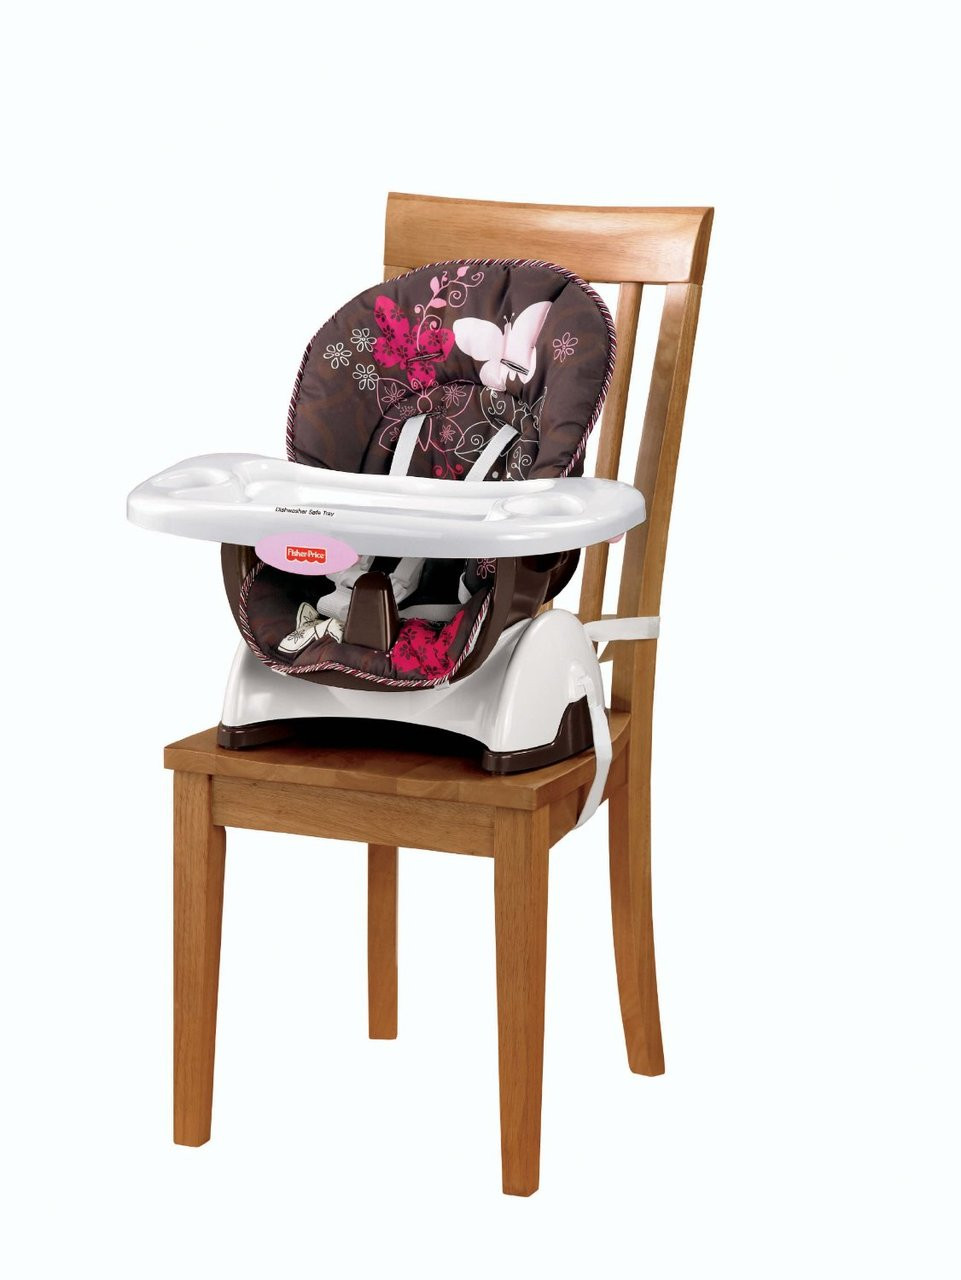 fisher price space saver high chair navy